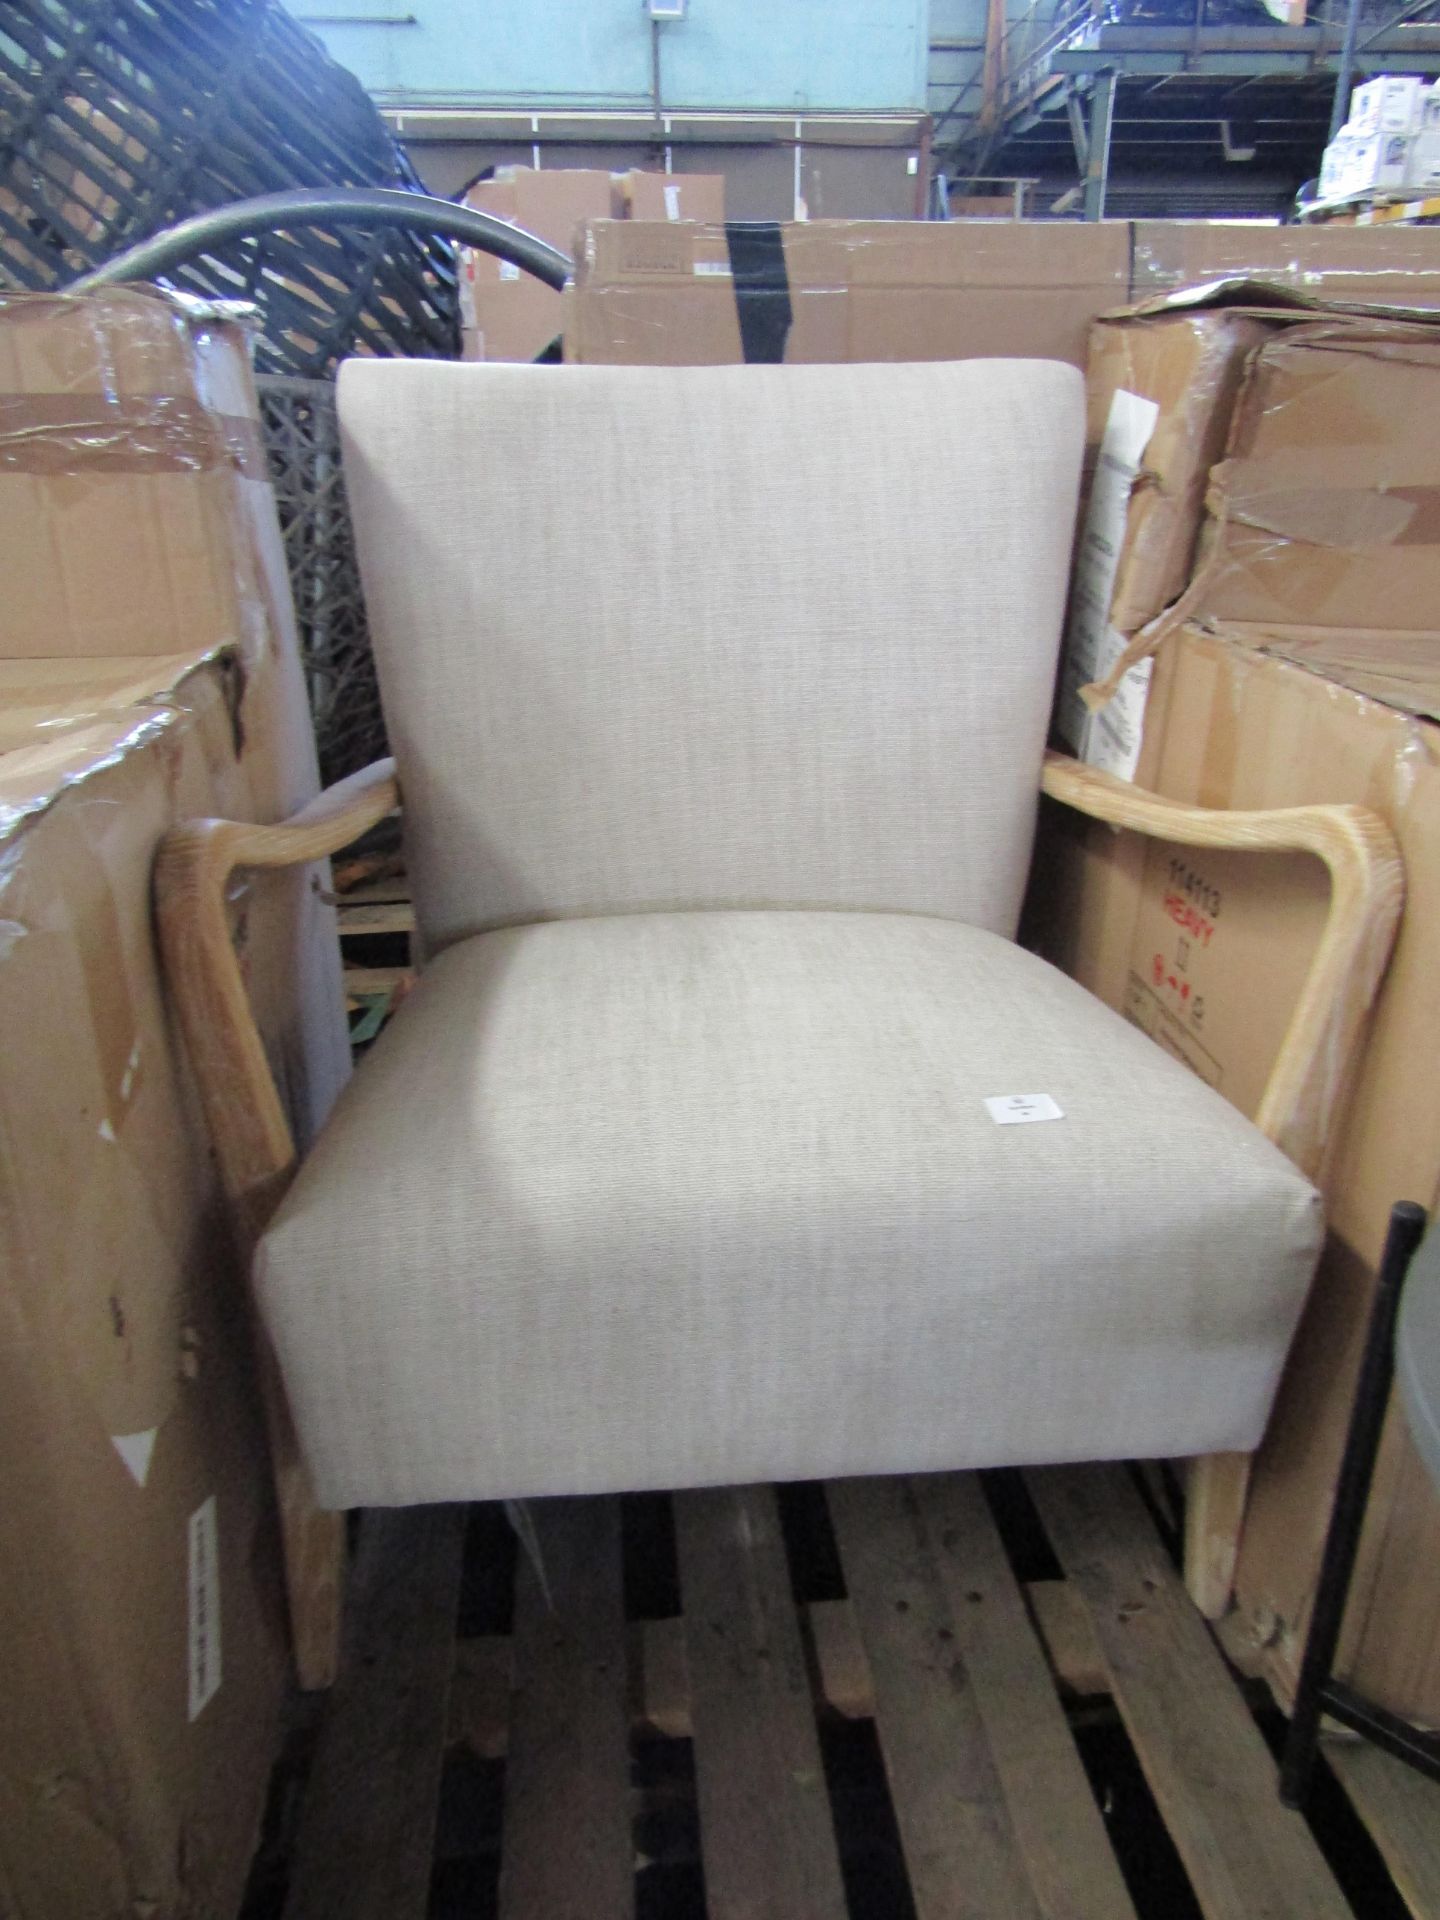 Moot Group Gallery Direct Chedworth Natural Occasional Chair RRP Â£428.00 (PLT S21) - The items in